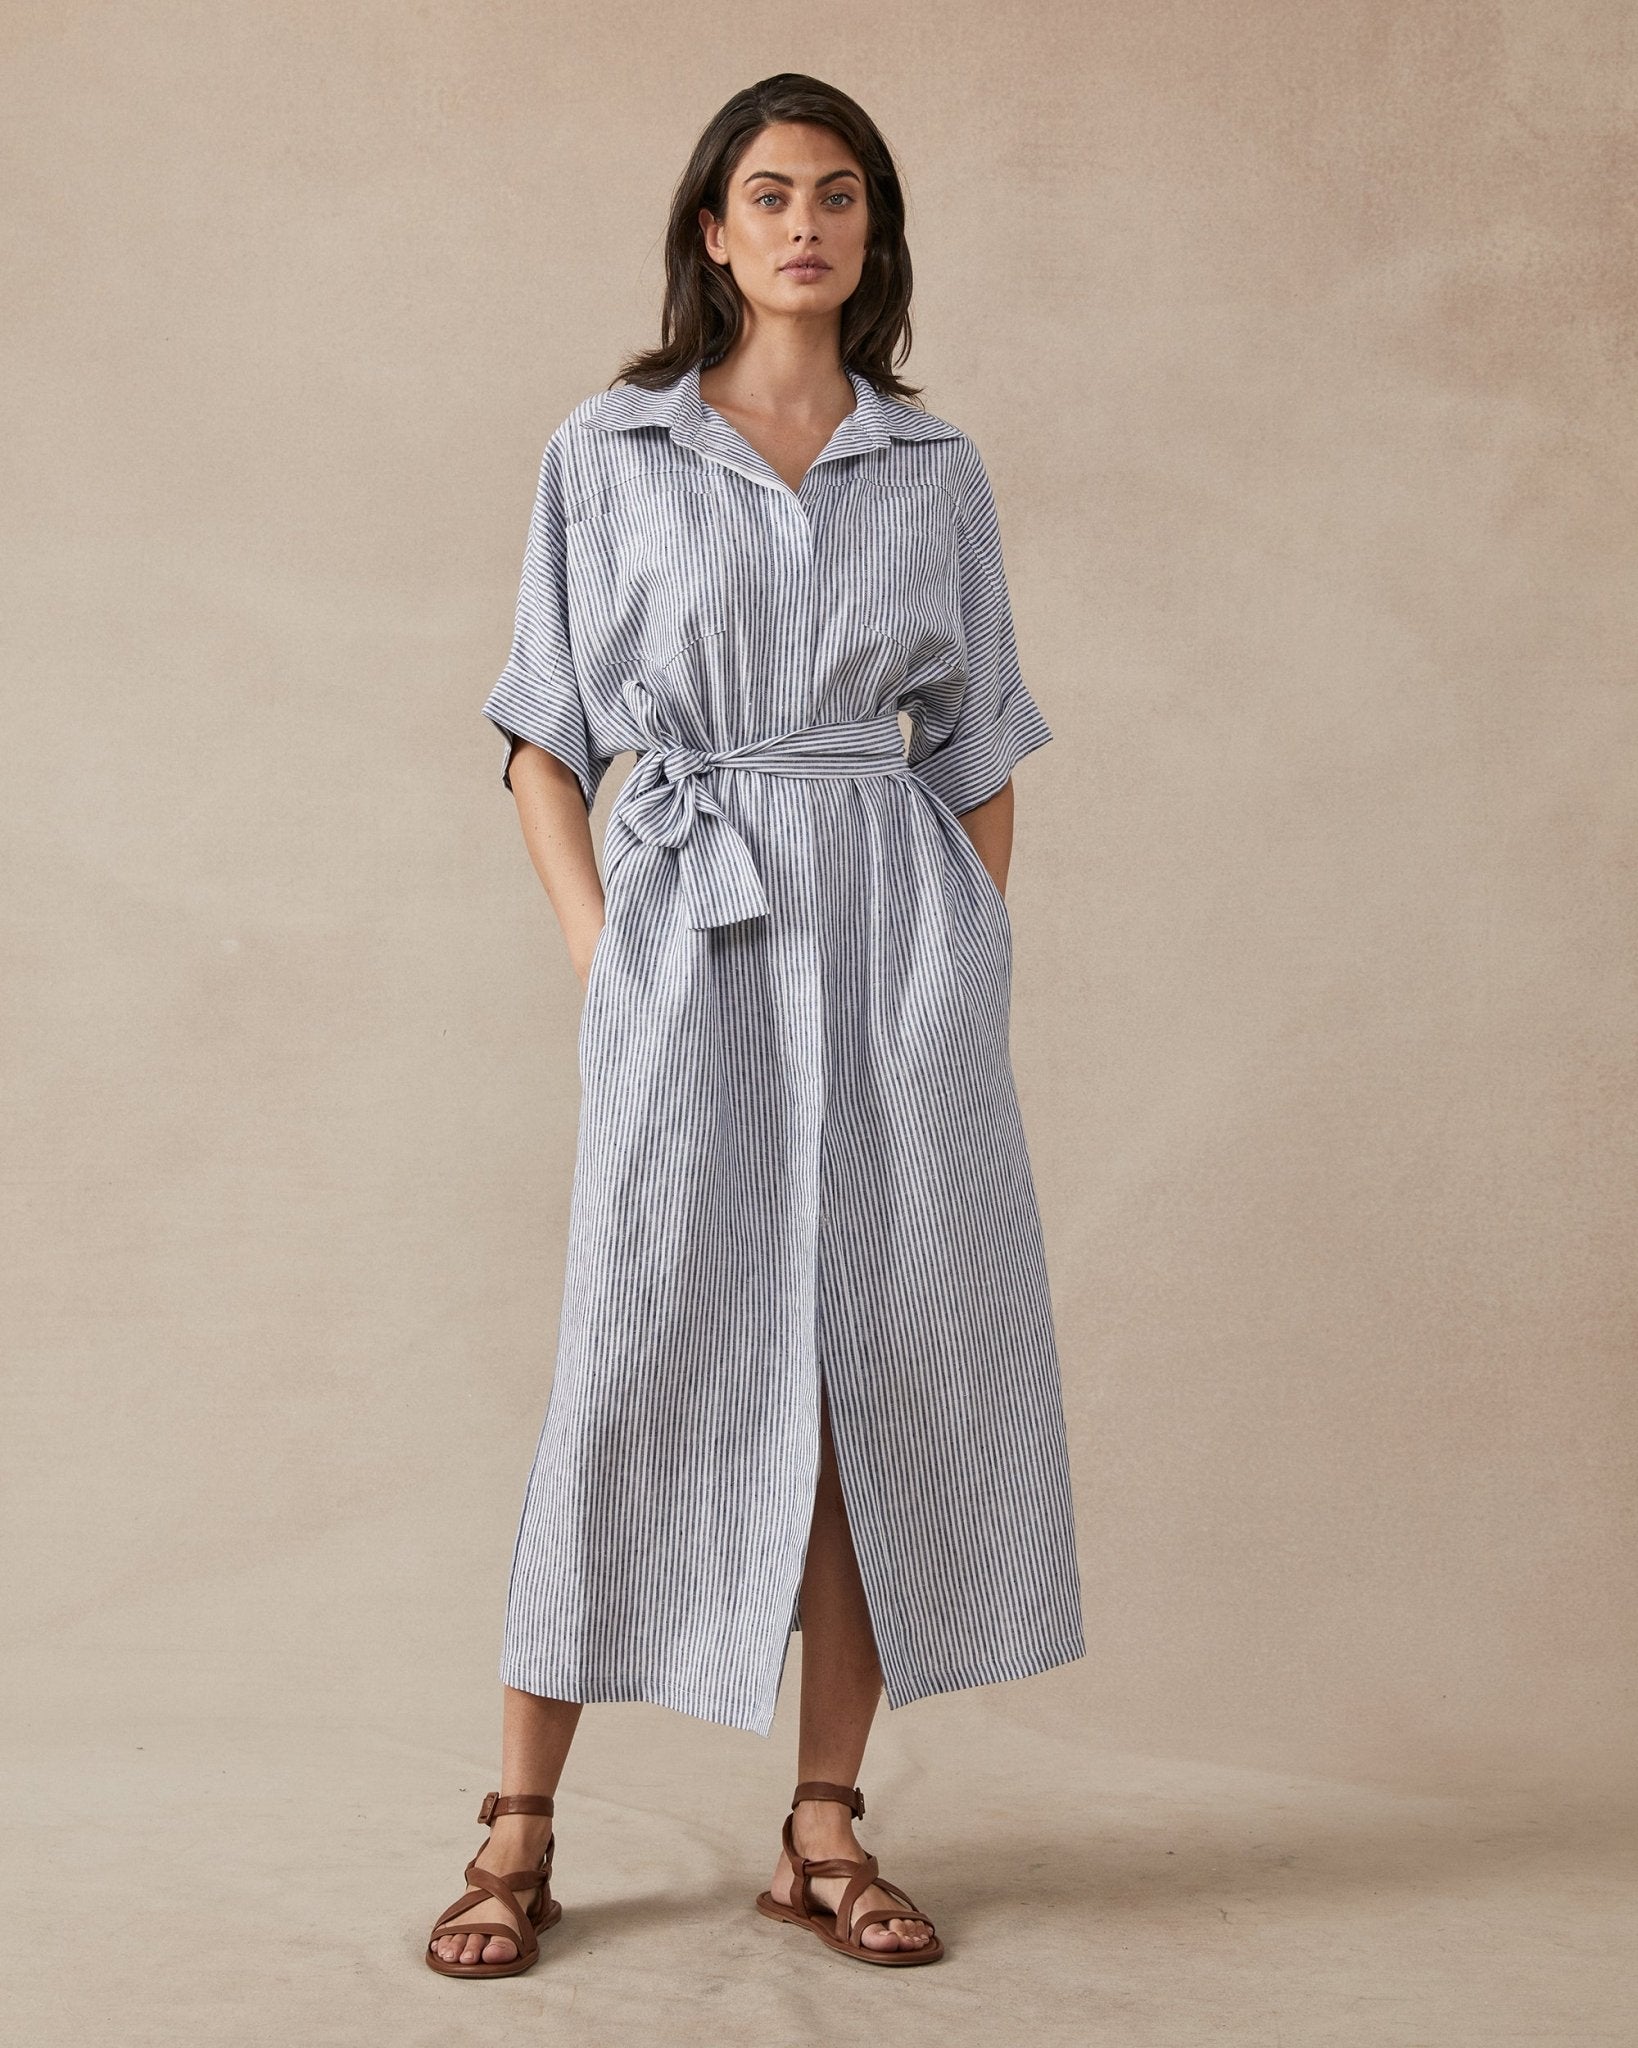 Shop Violet Dress in Navy Stripe Linen by Maggie The Label - Maggie The Label